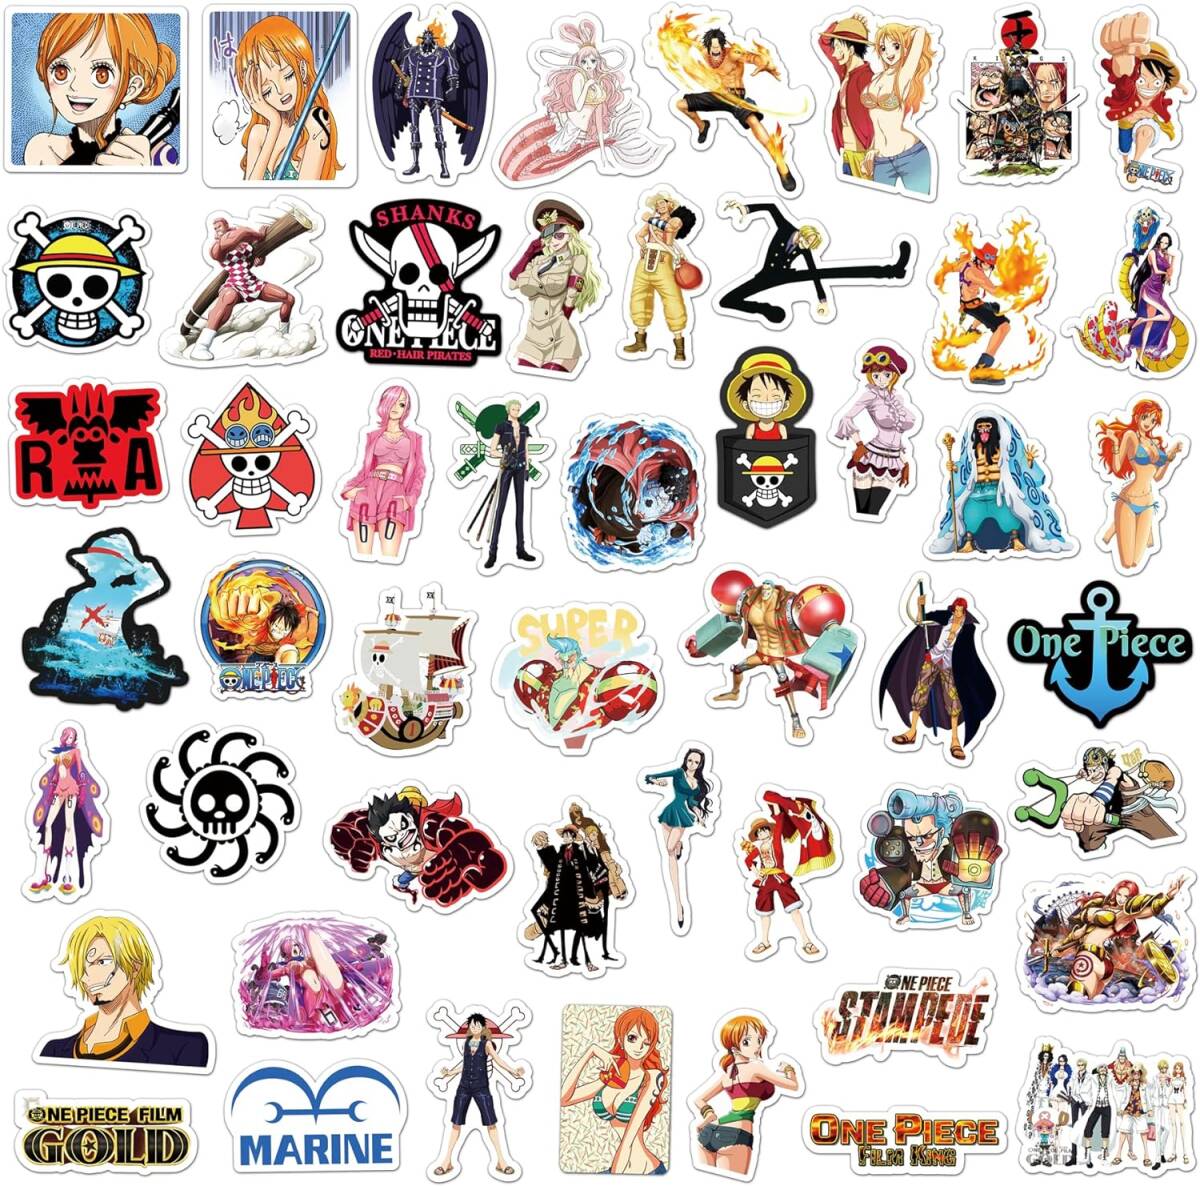 F1 for One-piece sticker 50 pieces set lovely anime for One-piece seal waterproof decal pretty stylish .